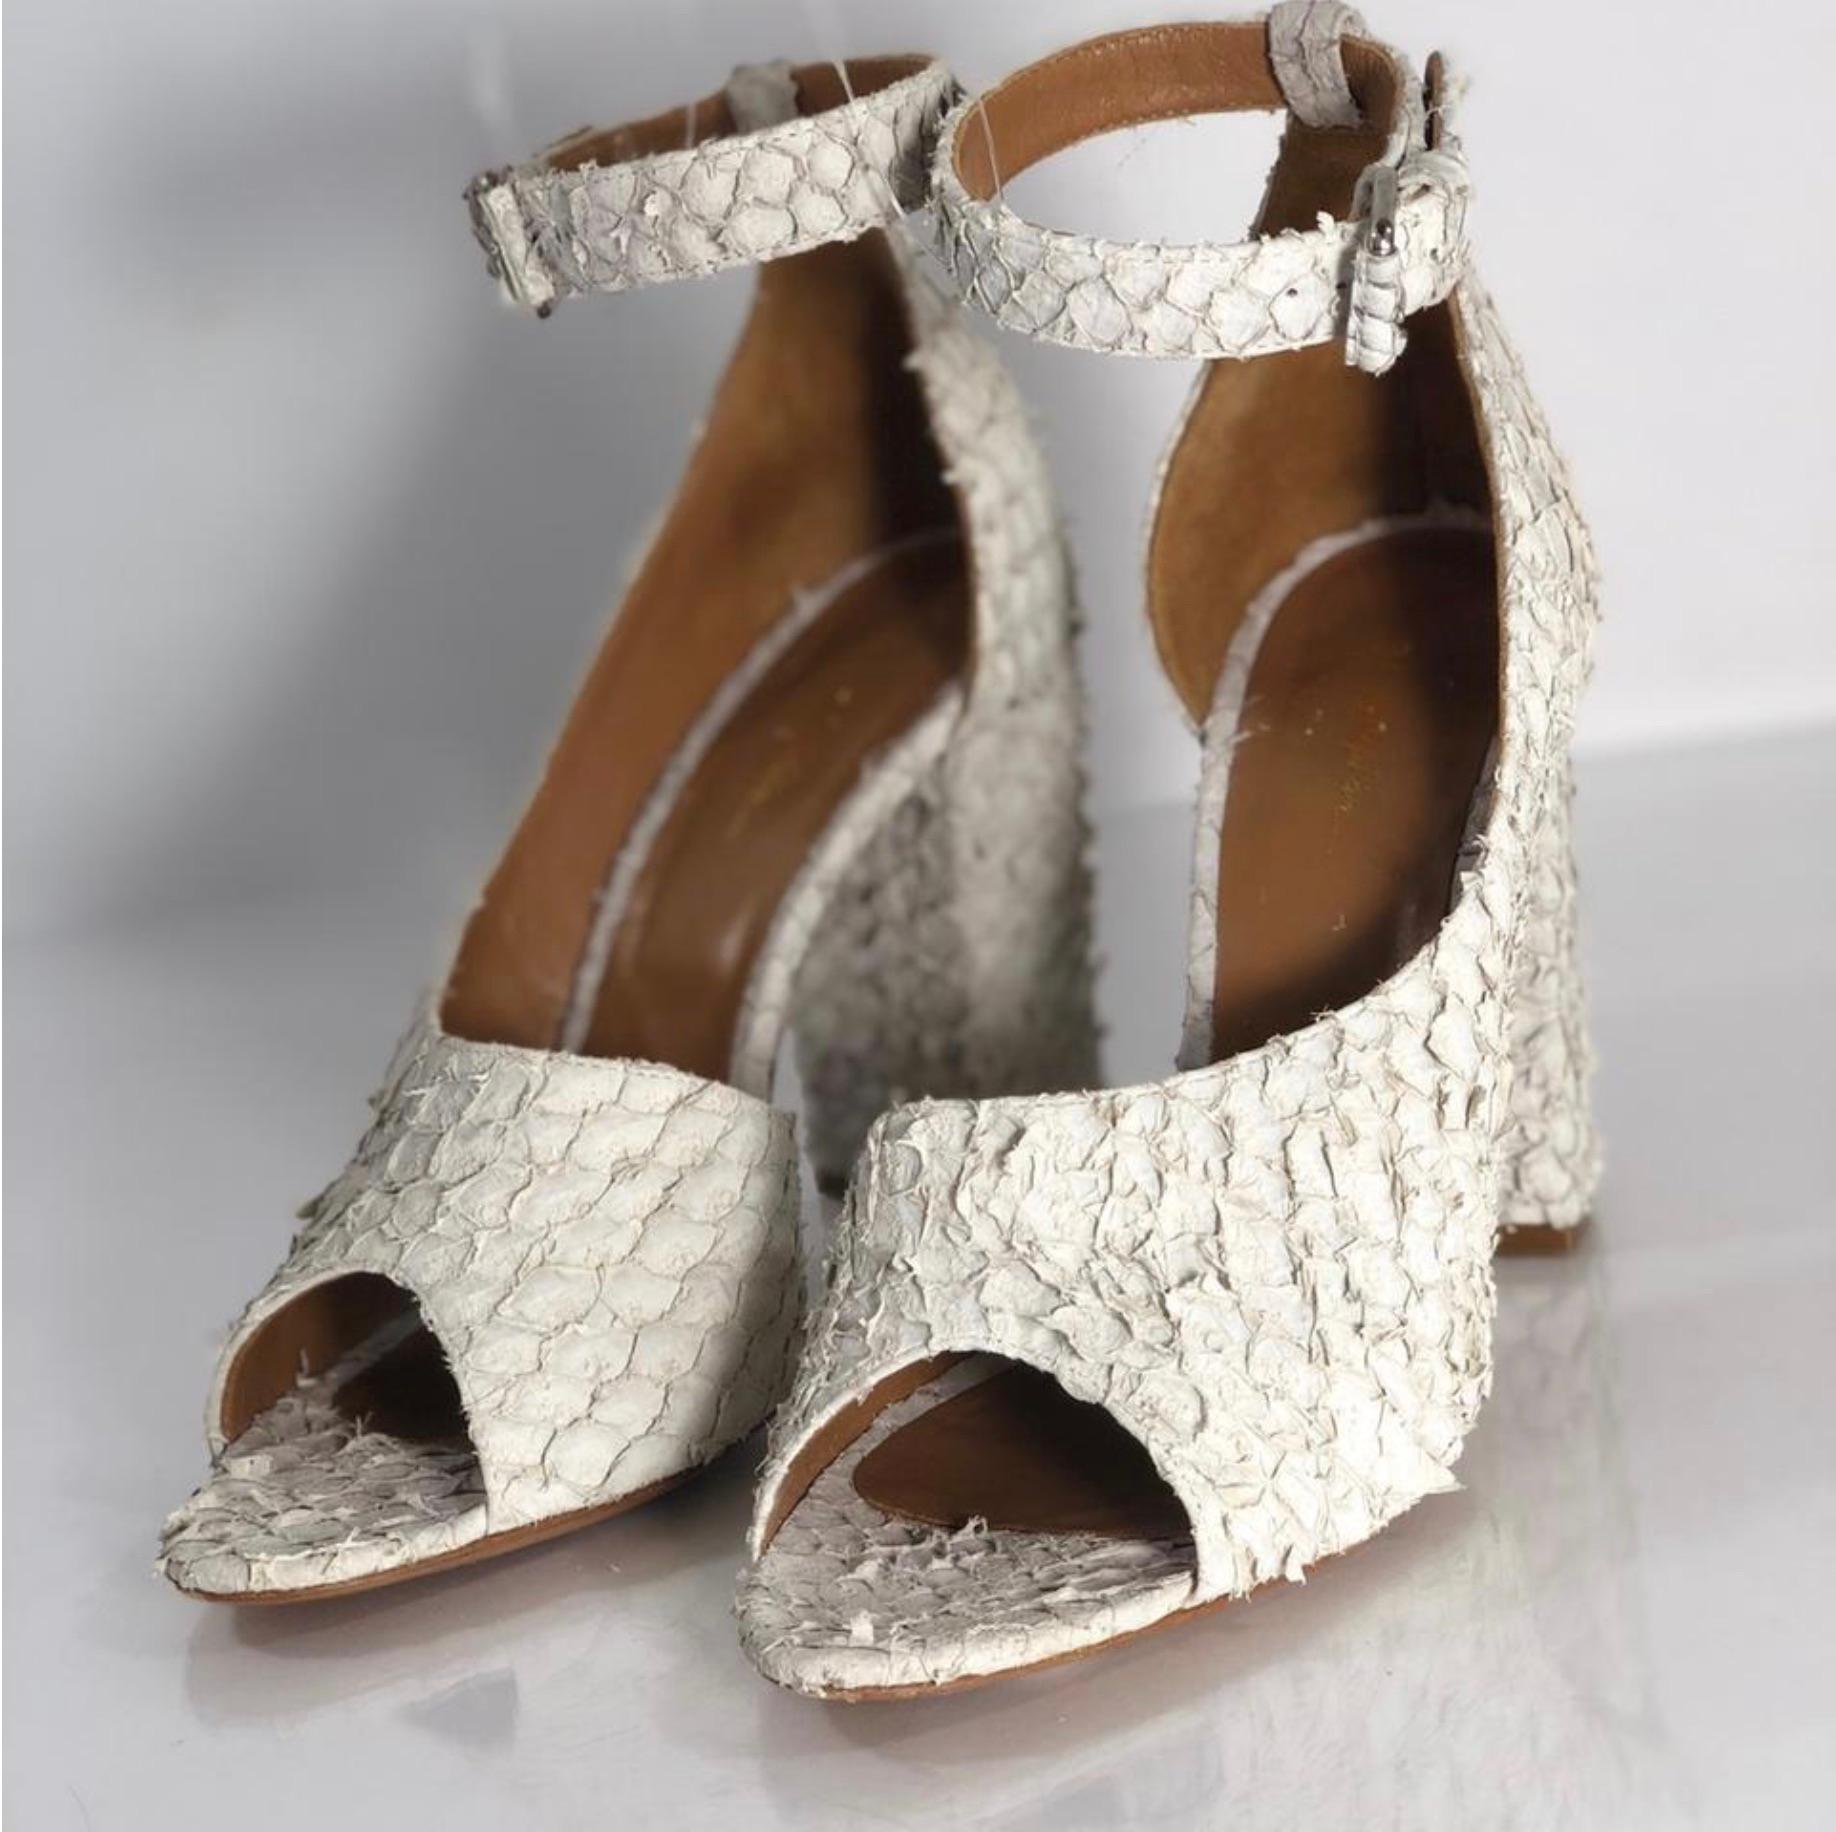 MODEL - 3.1 Phillip Lim Leather Textured Peep Toe Heel with Chunky Block Heel

CONDITION - Exceptional! Very light wear on outer soles. 

SKU - AIS

ORIGINAL RETAIL PRICE - 450 + tax

SIZE - Euro - 38.5 US - 8.5M

MATERIAL - Leather with Decorative